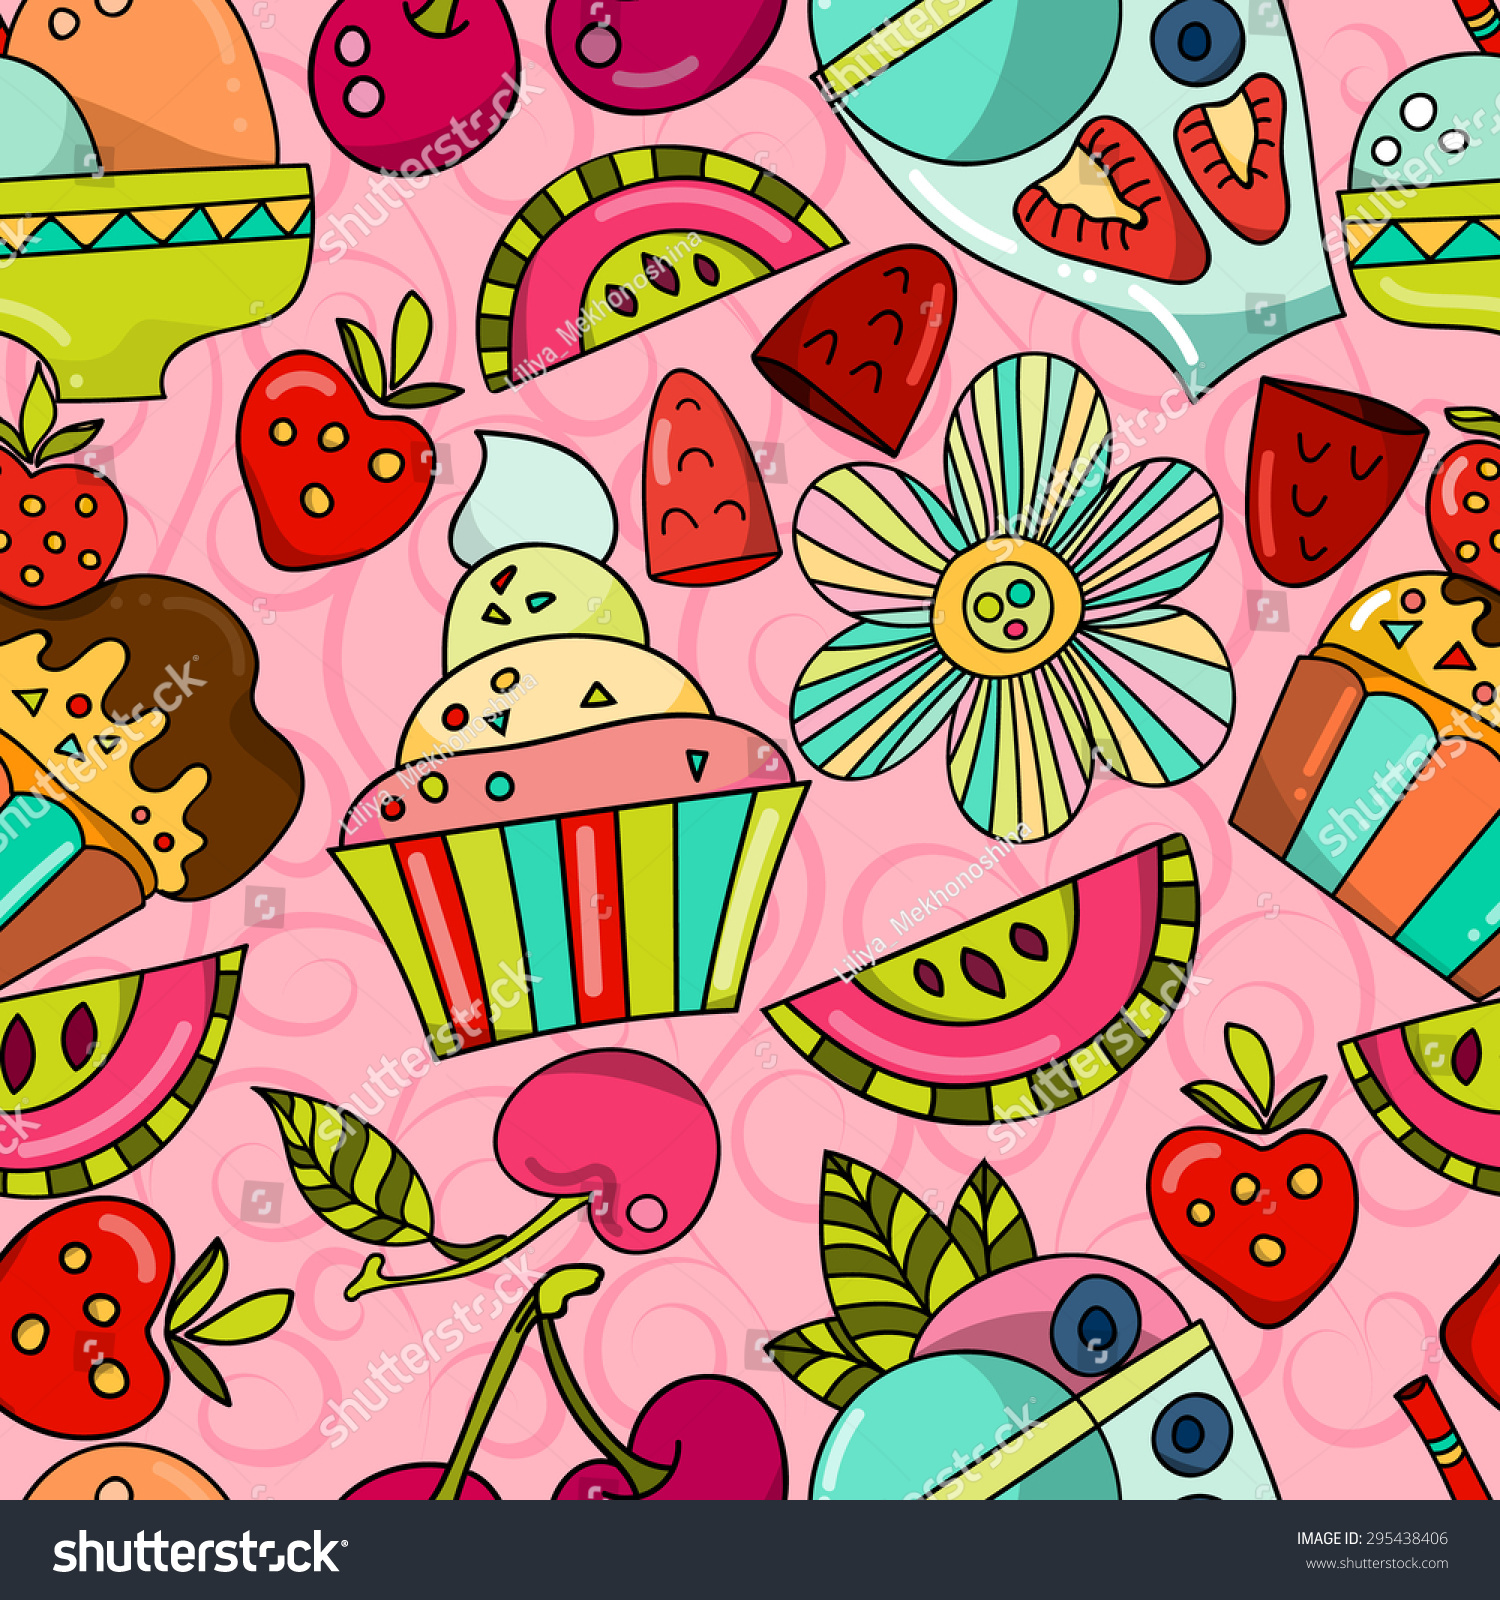 Seamless pattern can be using to stationery, wrapping paper, packaging, invitations, greeting cards #295438406